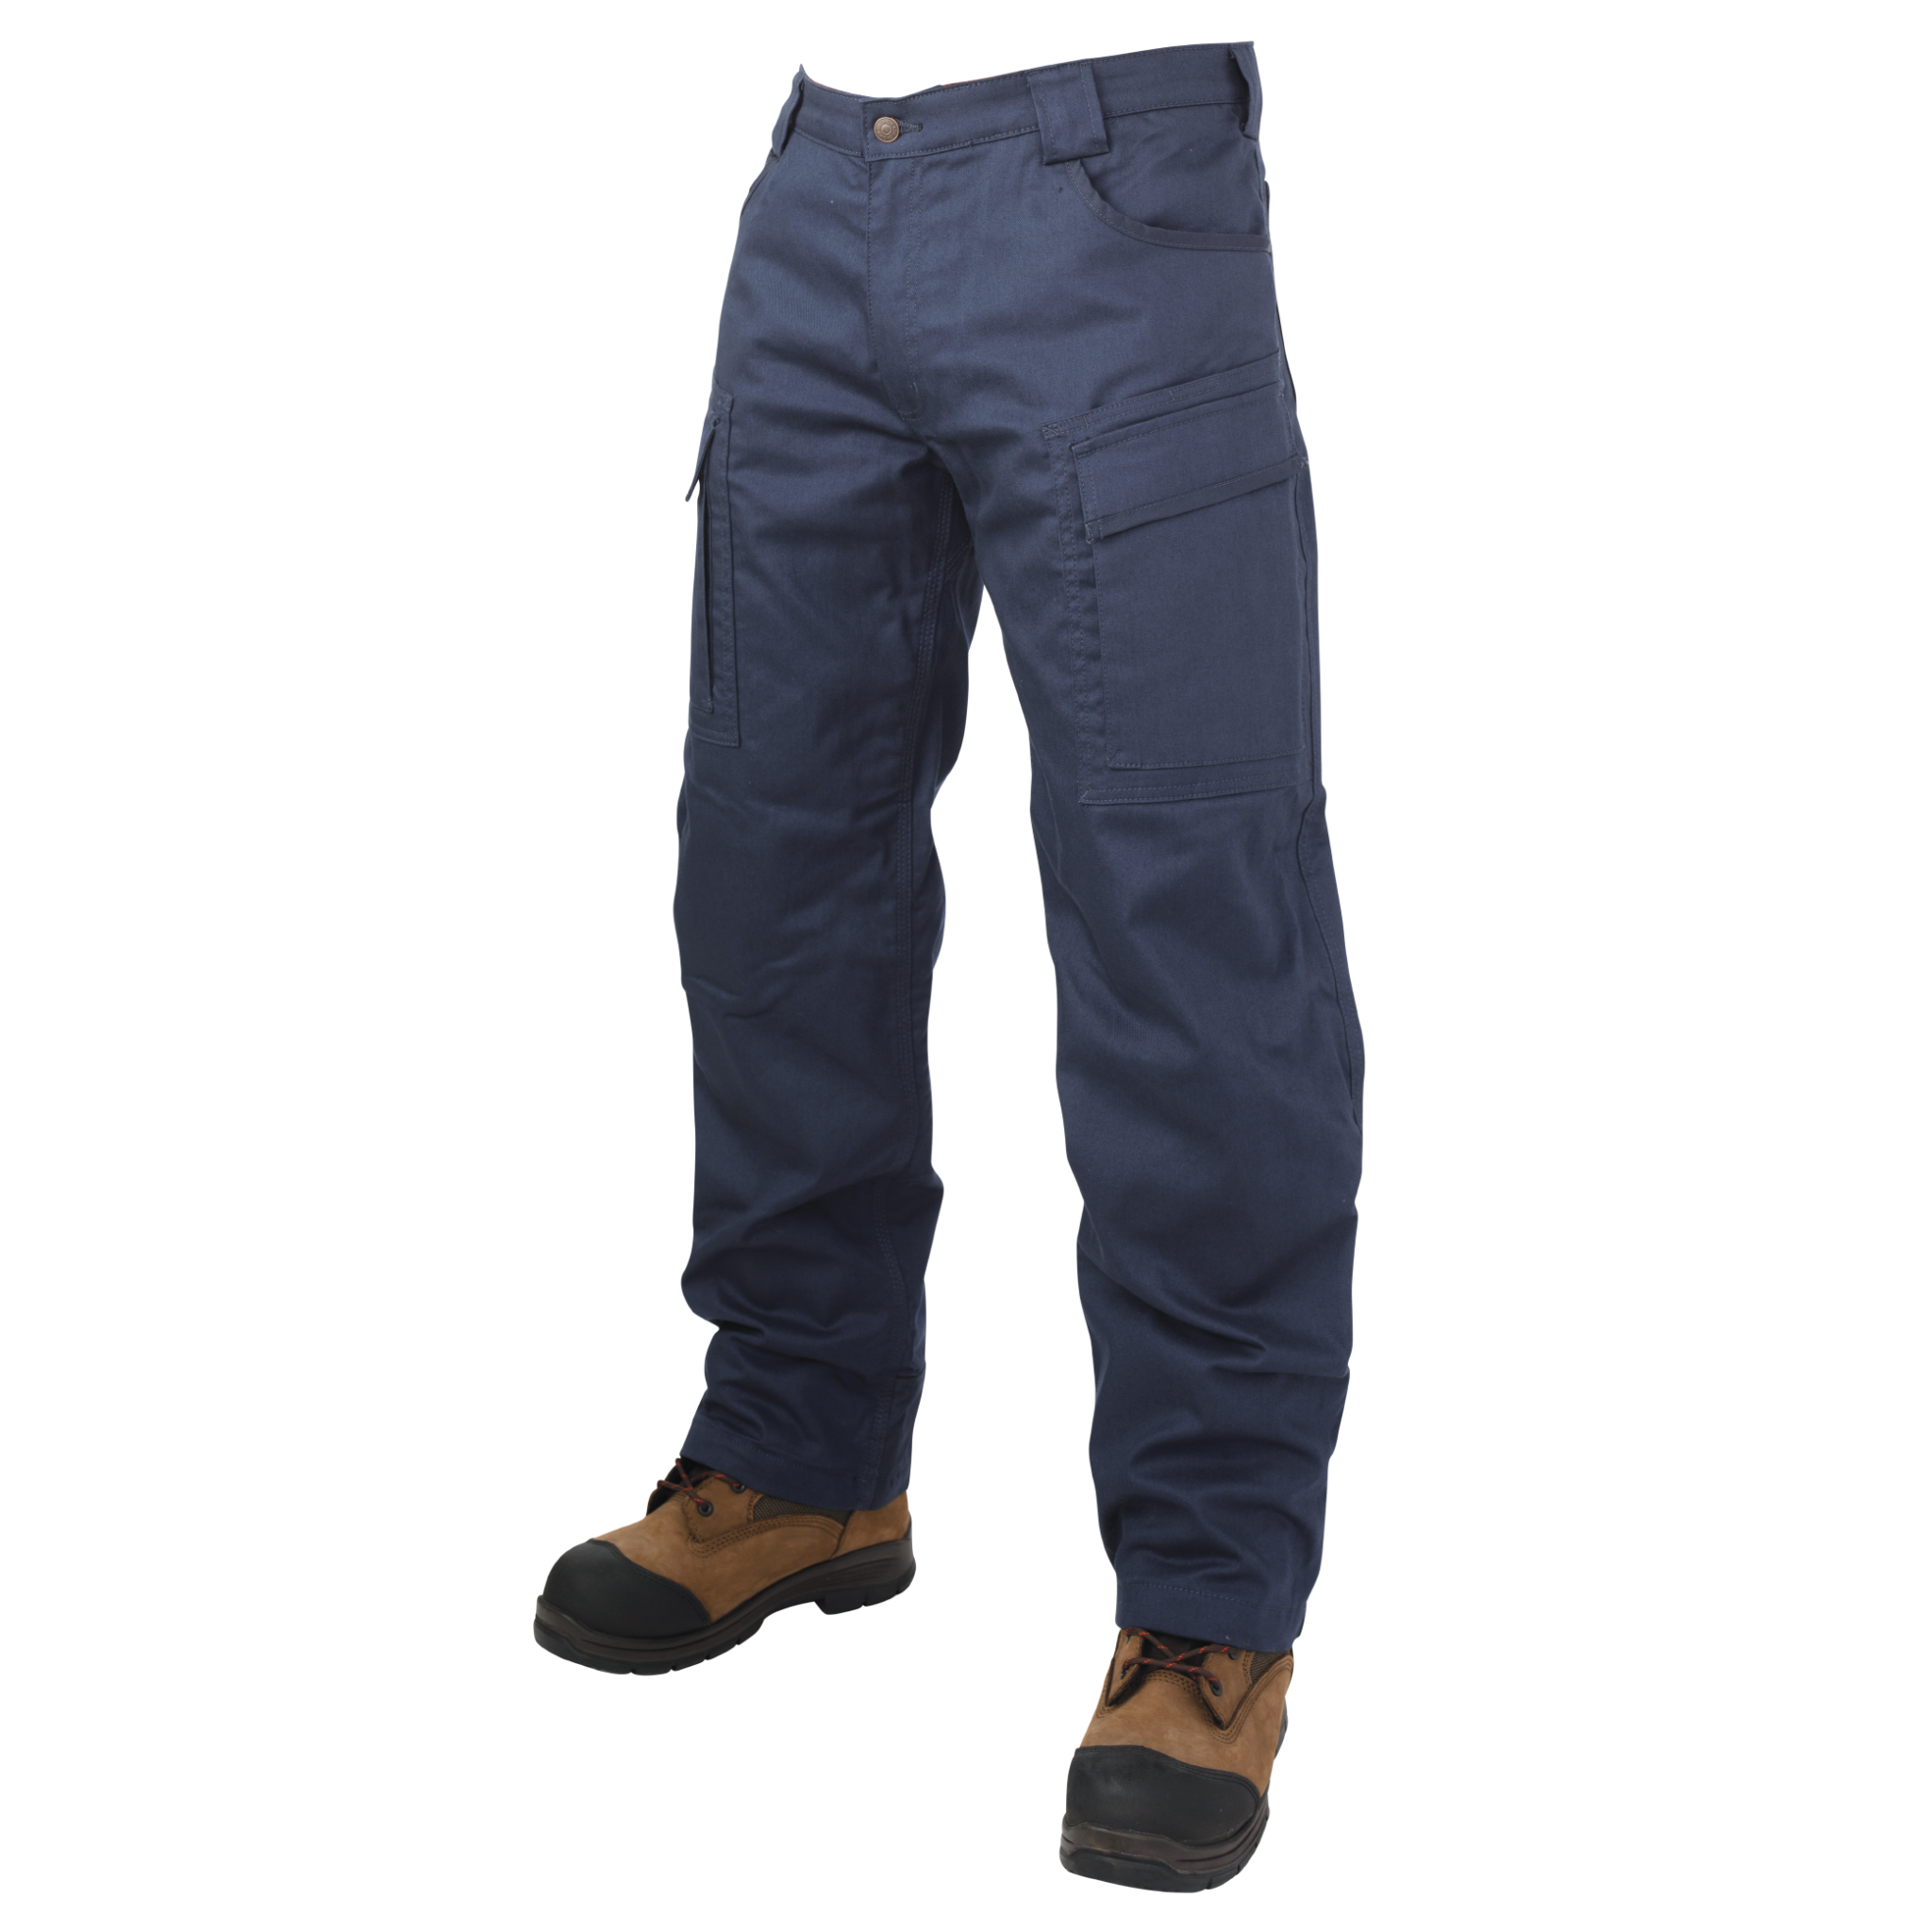 Fleece Lined Strapped Cargo Pants